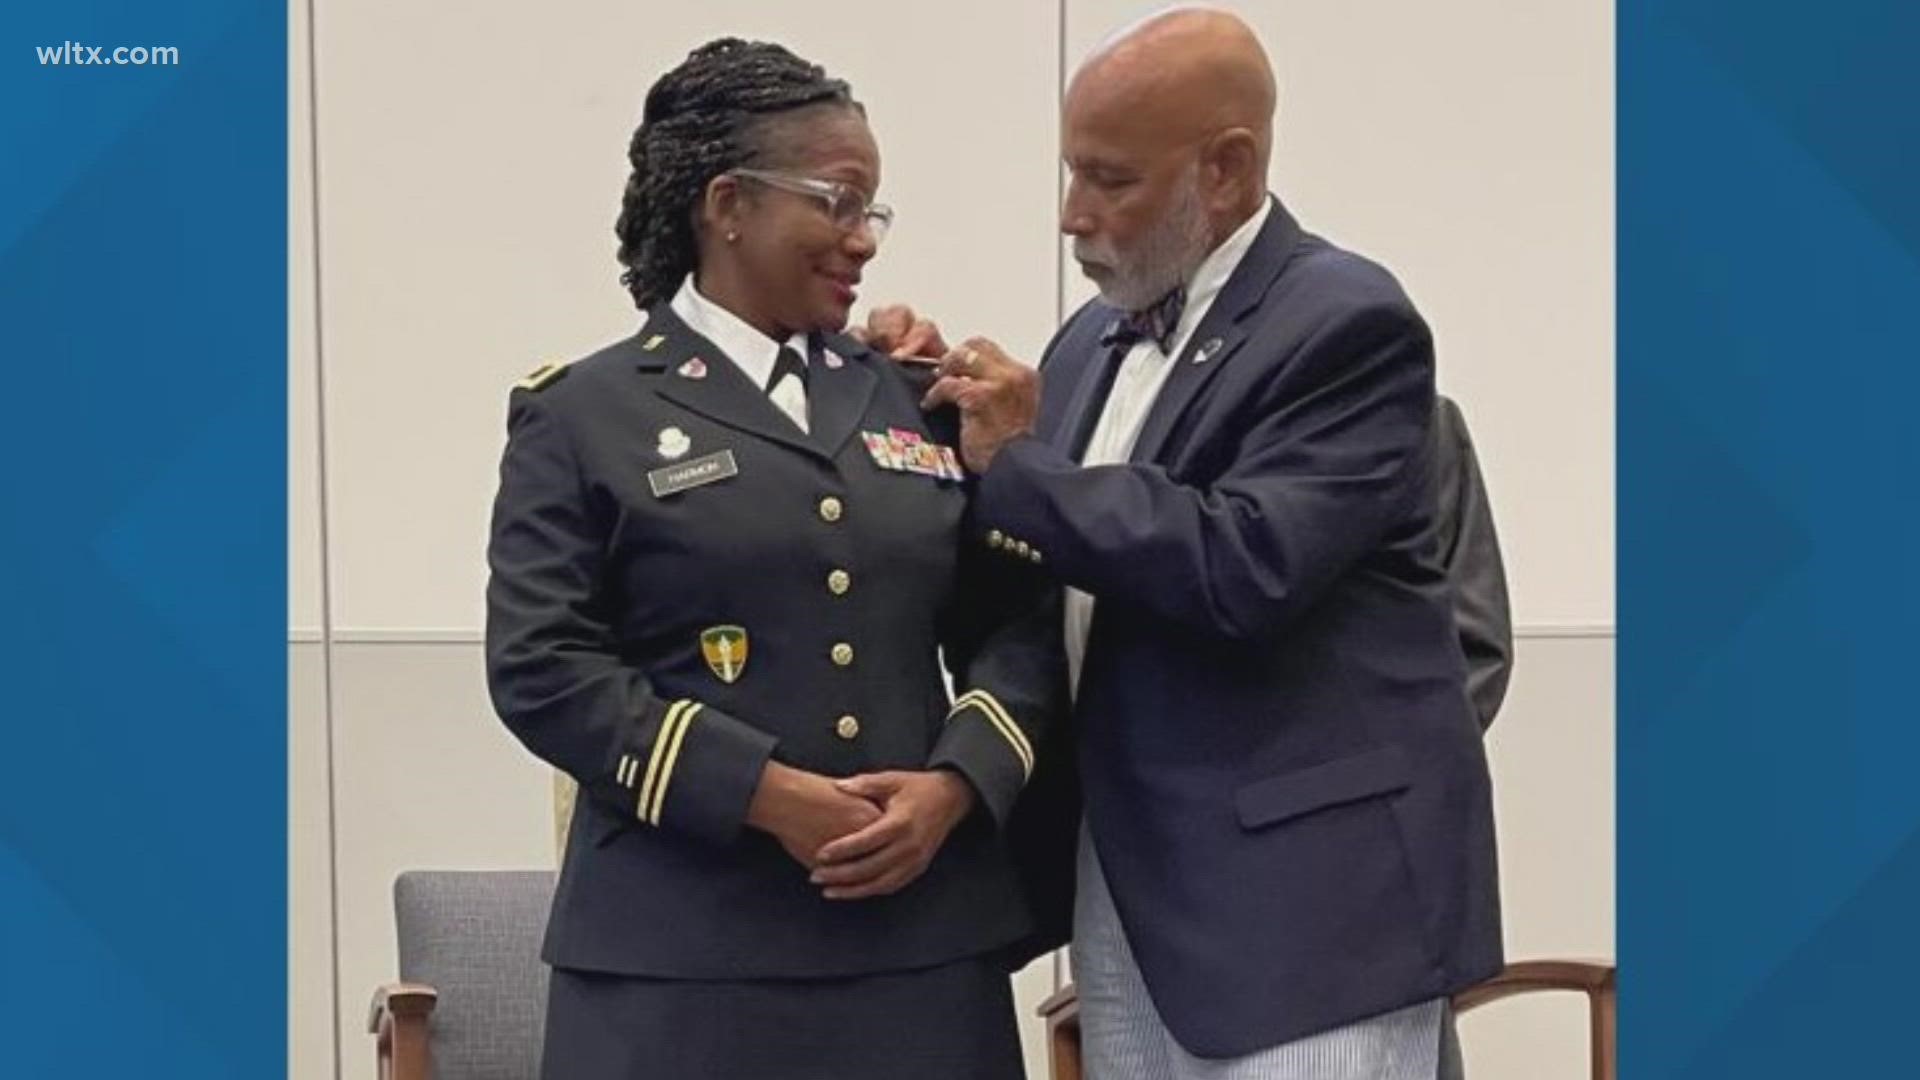 Sharon Harmon is a graduate of Newberry High School and is now Rhode Island's first black Colonel.